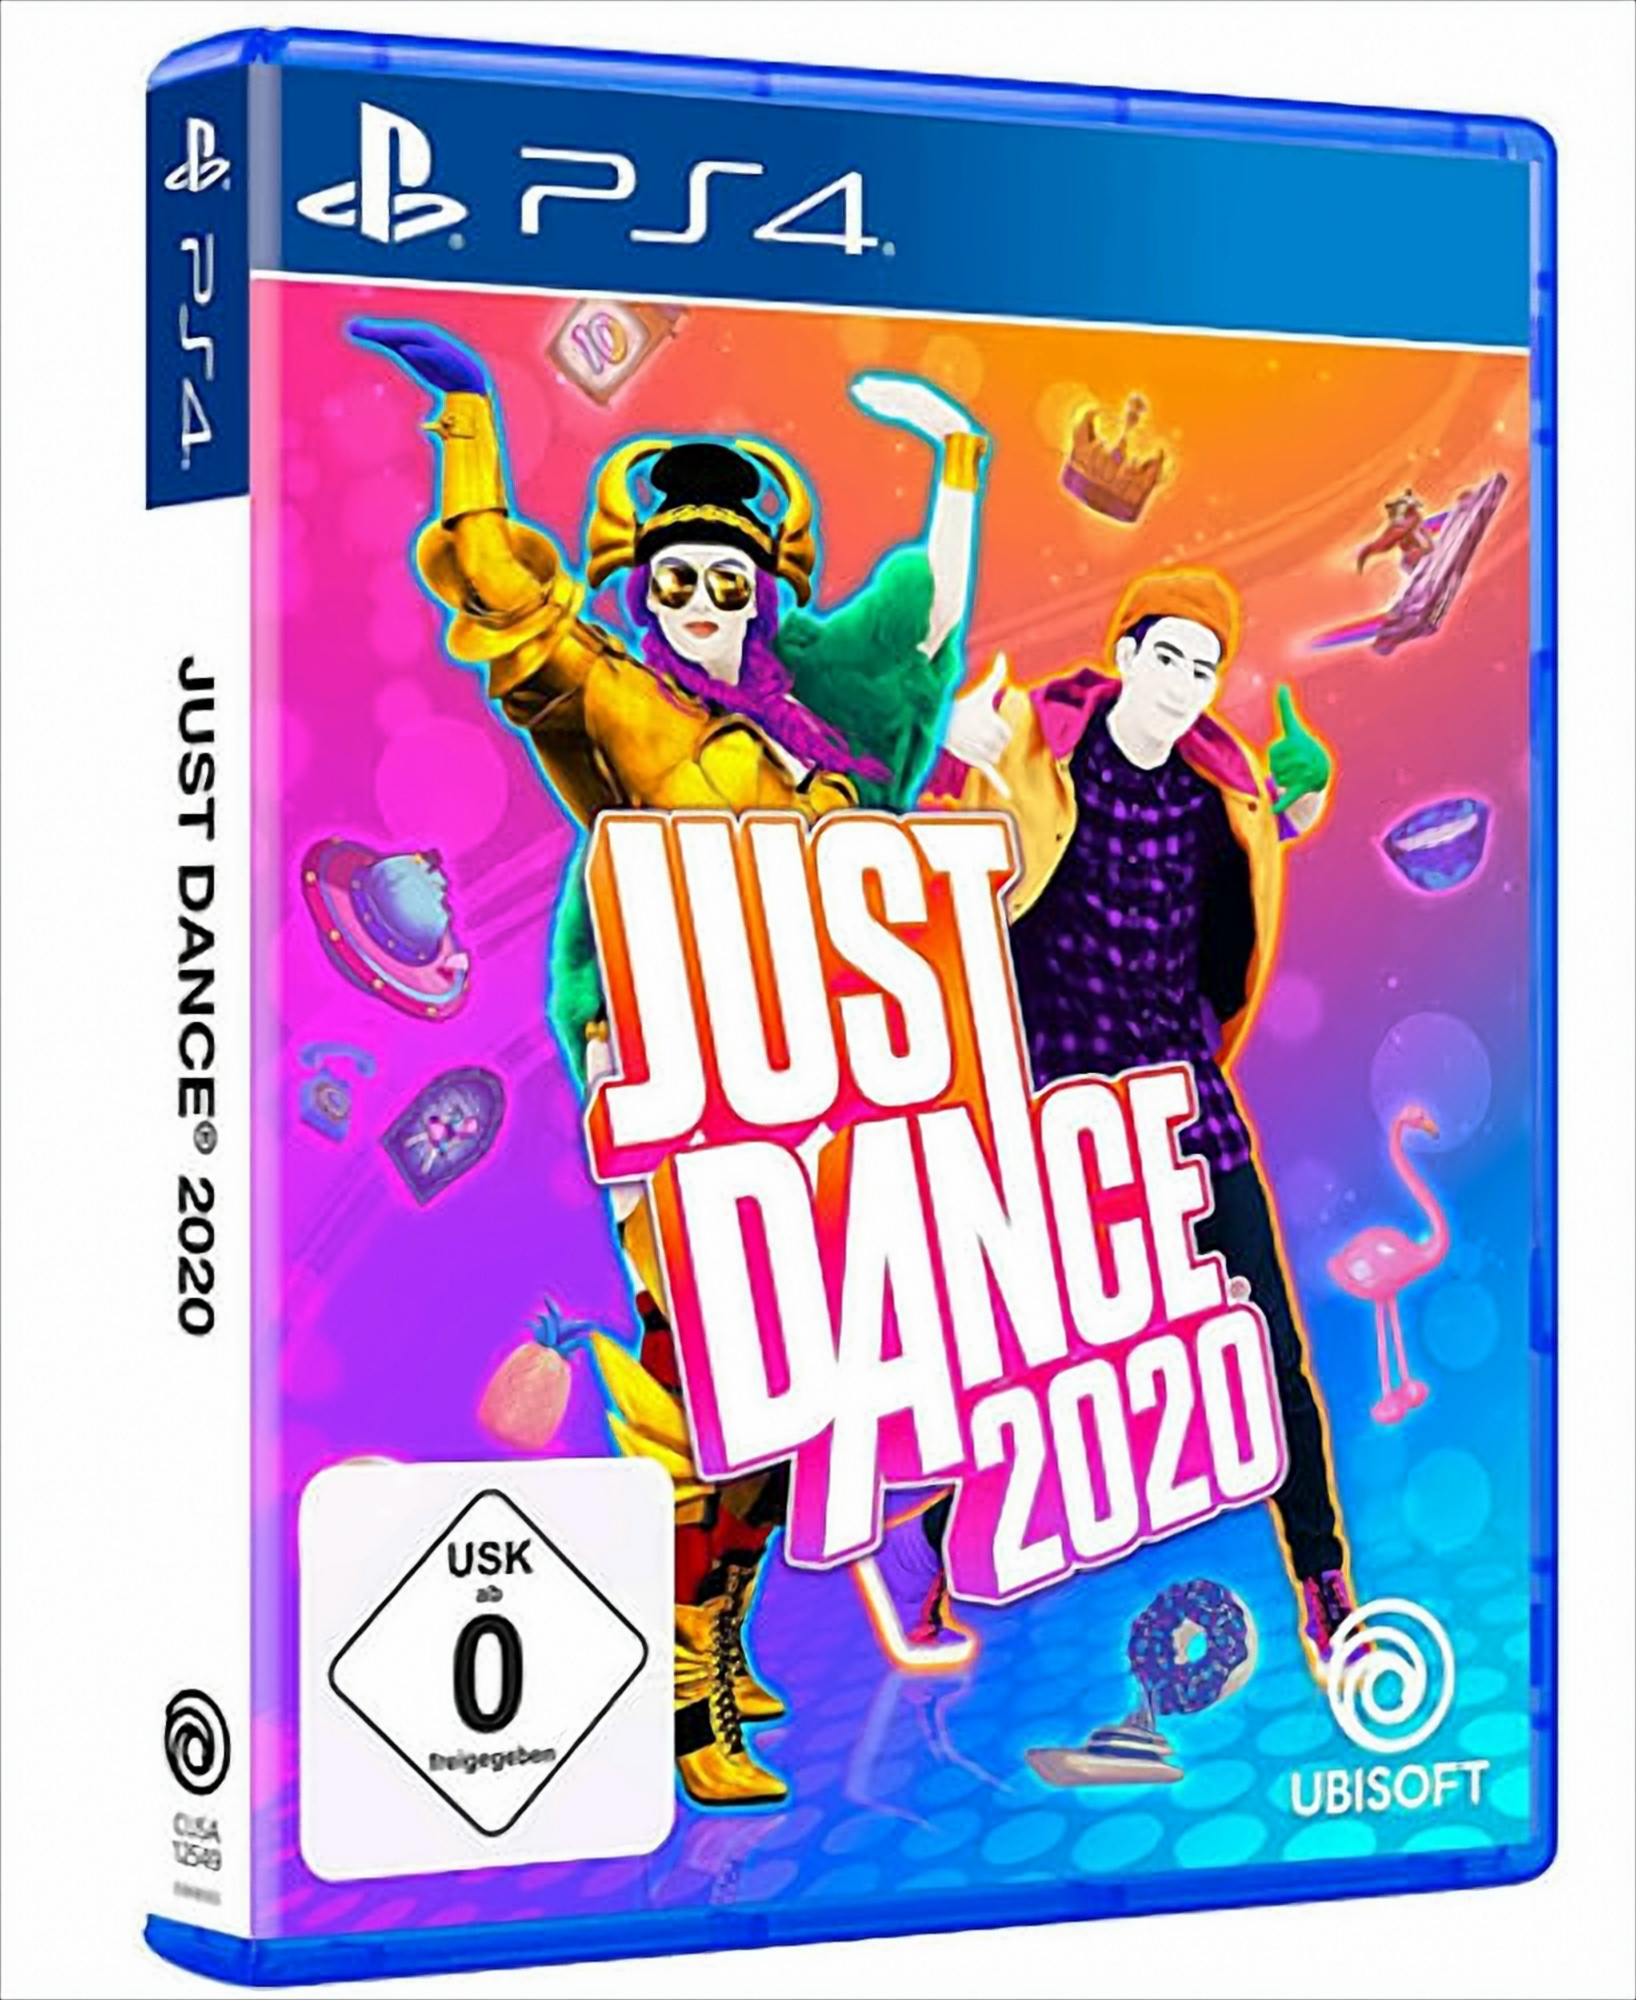 [PlayStation Just - 4] 2020 Dance